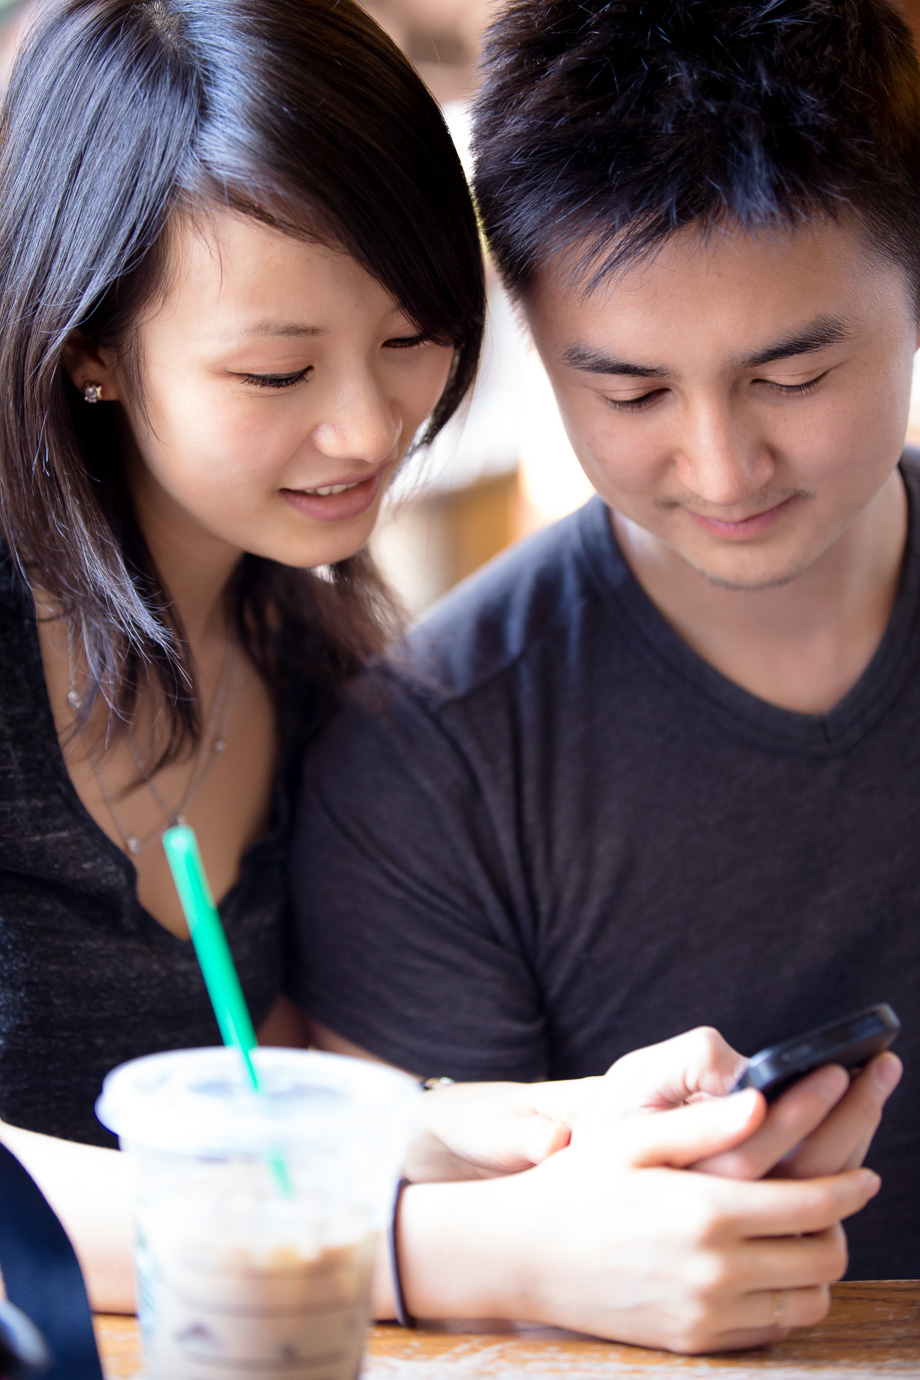 the couple at Starbucks looking at something on an iPhone